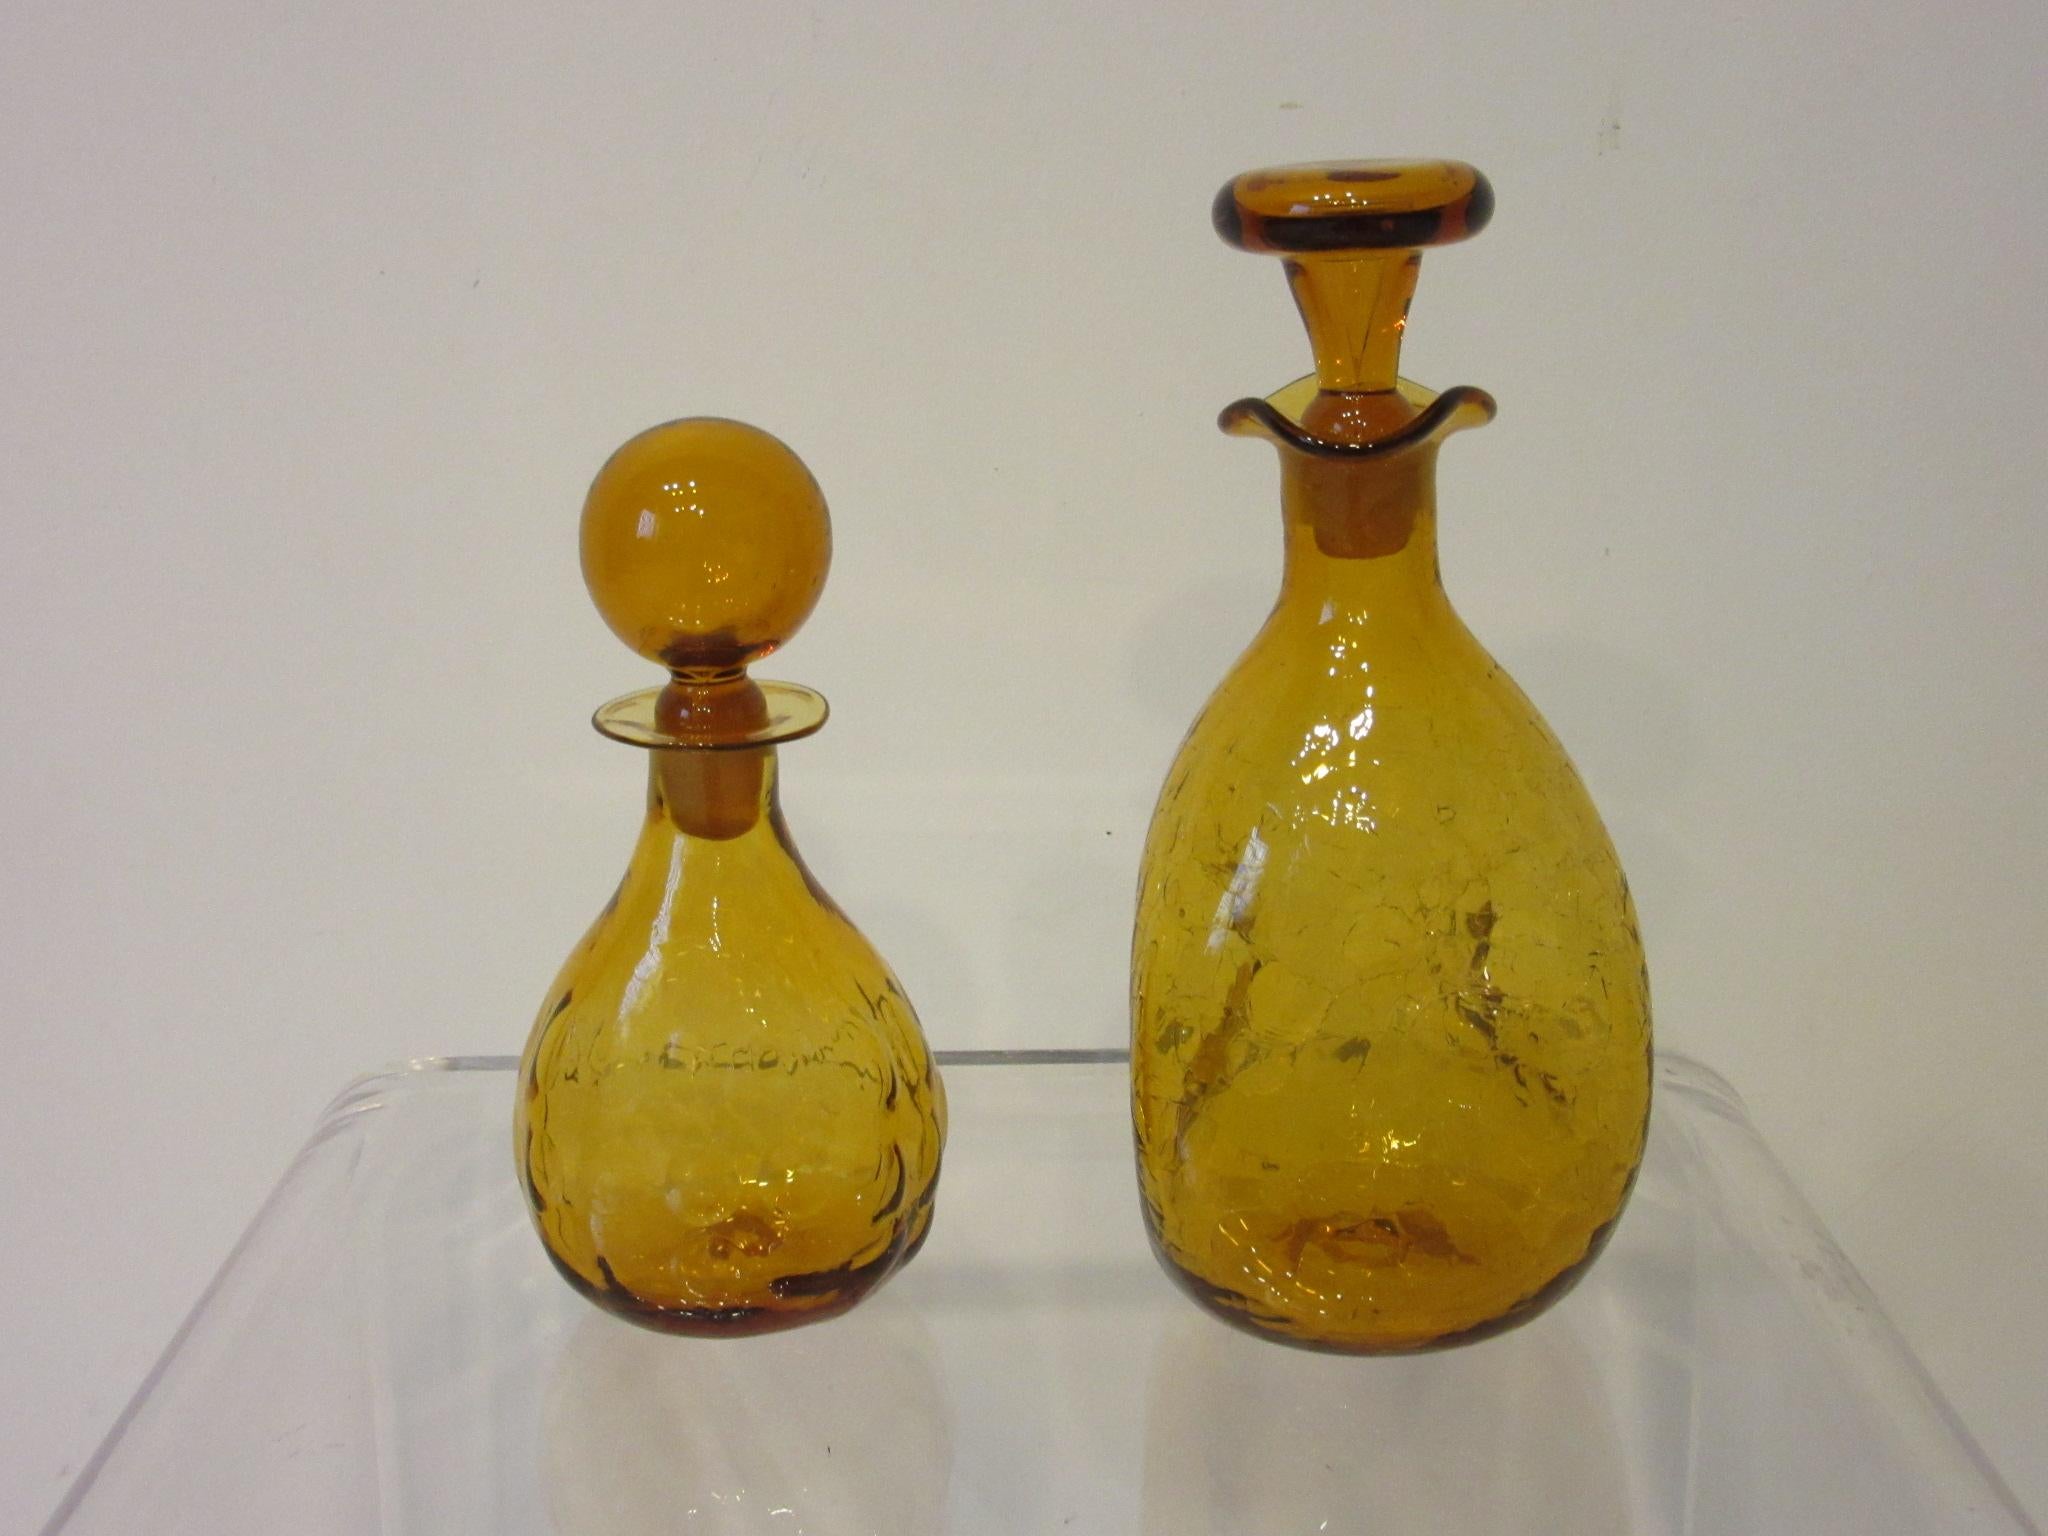 A pair of hand blown decanters with stoppers the smaller one having the bubble pattern and the larger one having the crackle pattern with pinched design. Both are in tangerine color and would work in your bar or as interior accessories make under